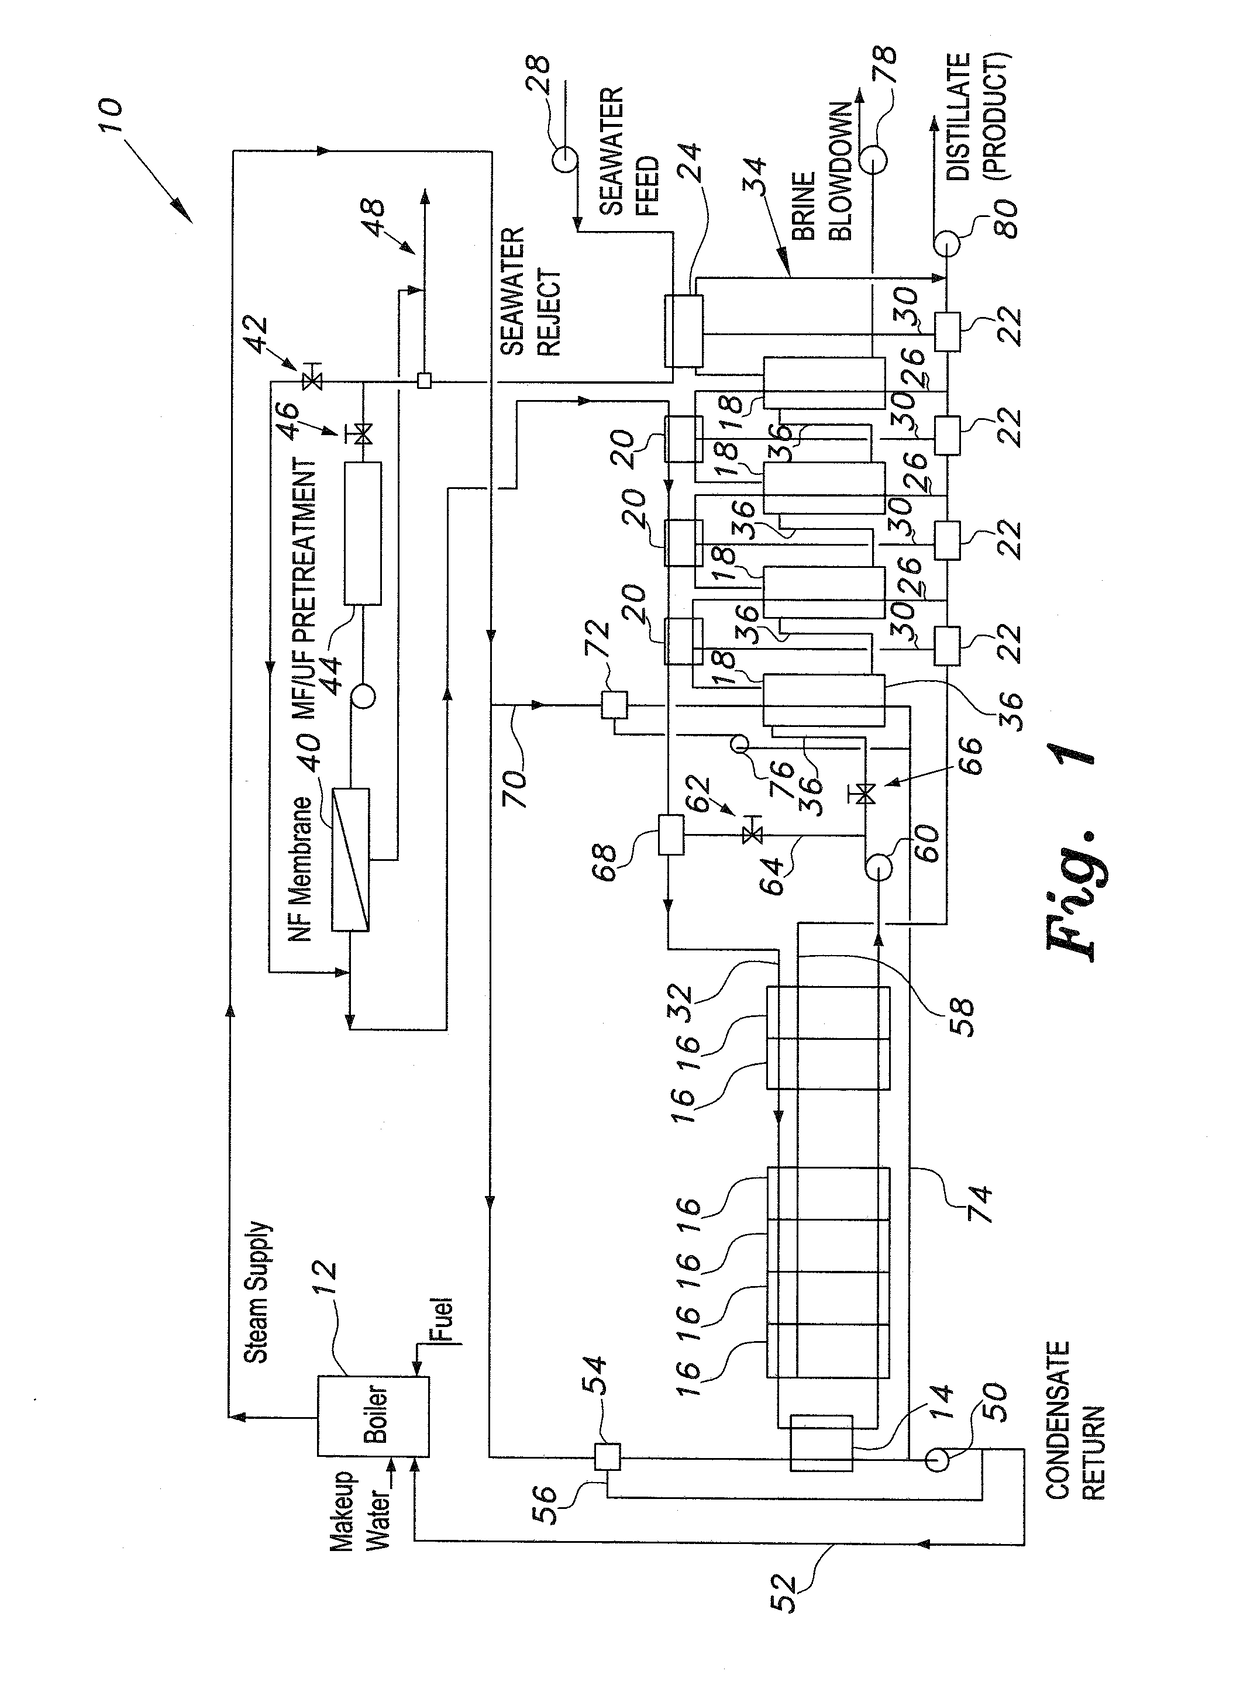 Combination multi-effect distillation and multi-stage flash evaporation system